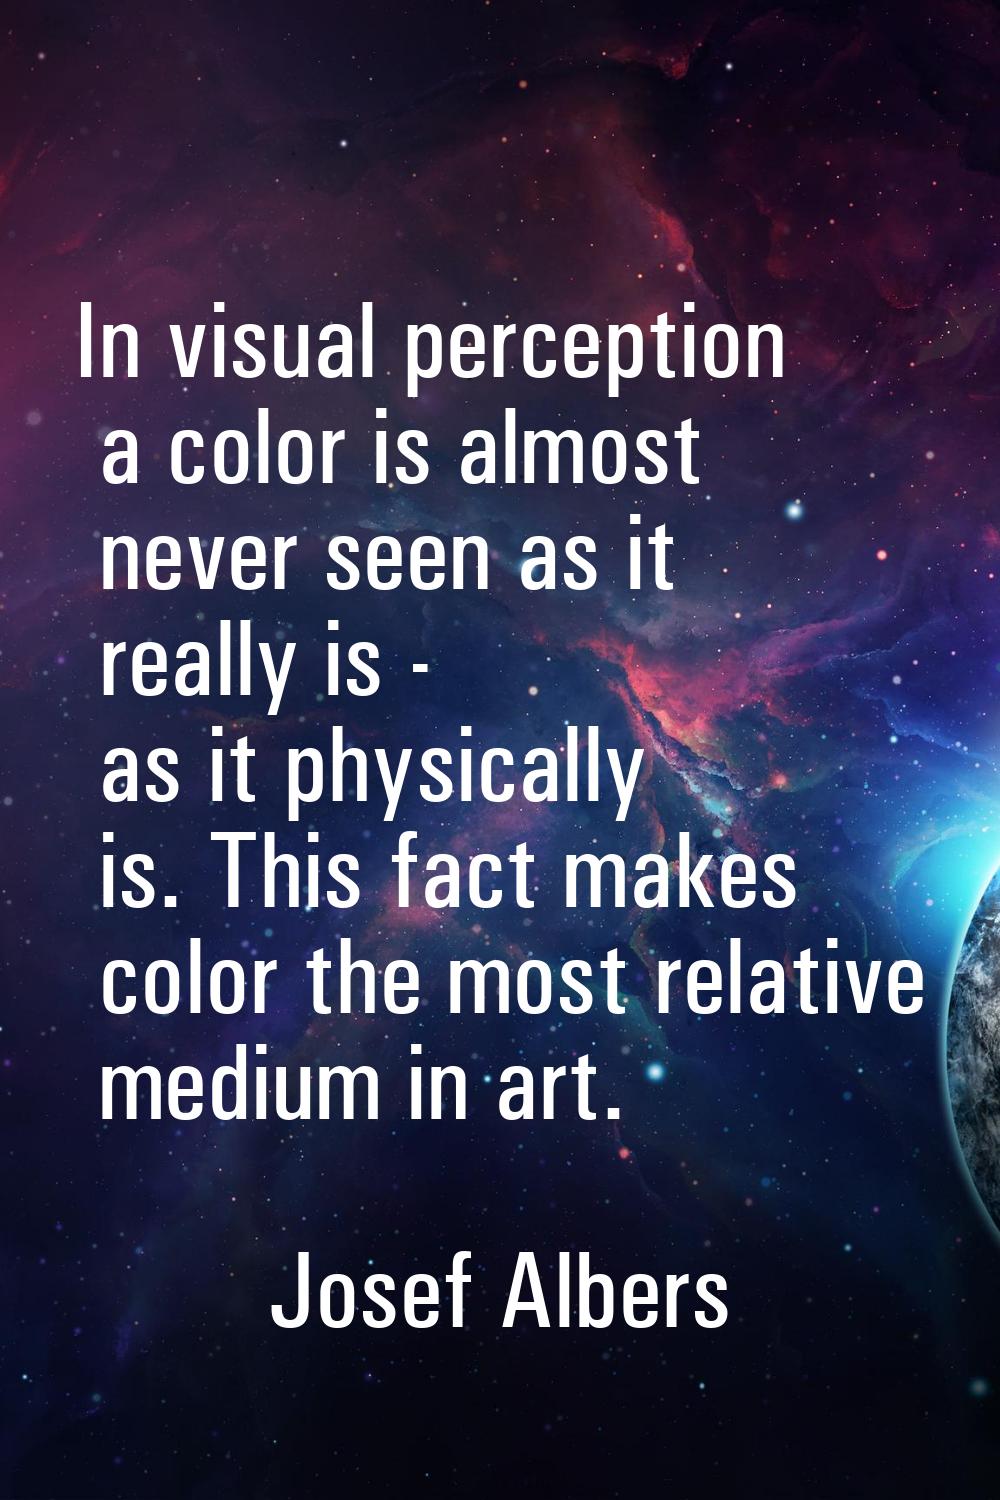 In visual perception a color is almost never seen as it really is - as it physically is. This fact 